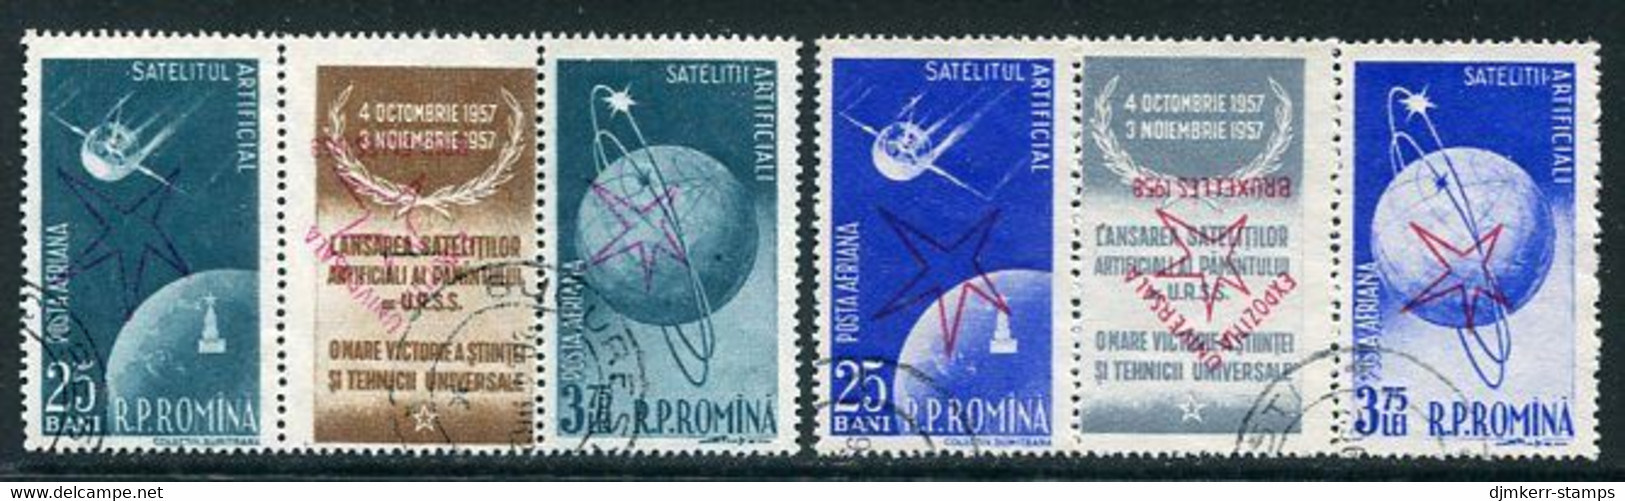 ROMANIA 1958 Brussels Exhibition Inverted Overprint Strips Used.  Michel 1717-20 K - Gebraucht